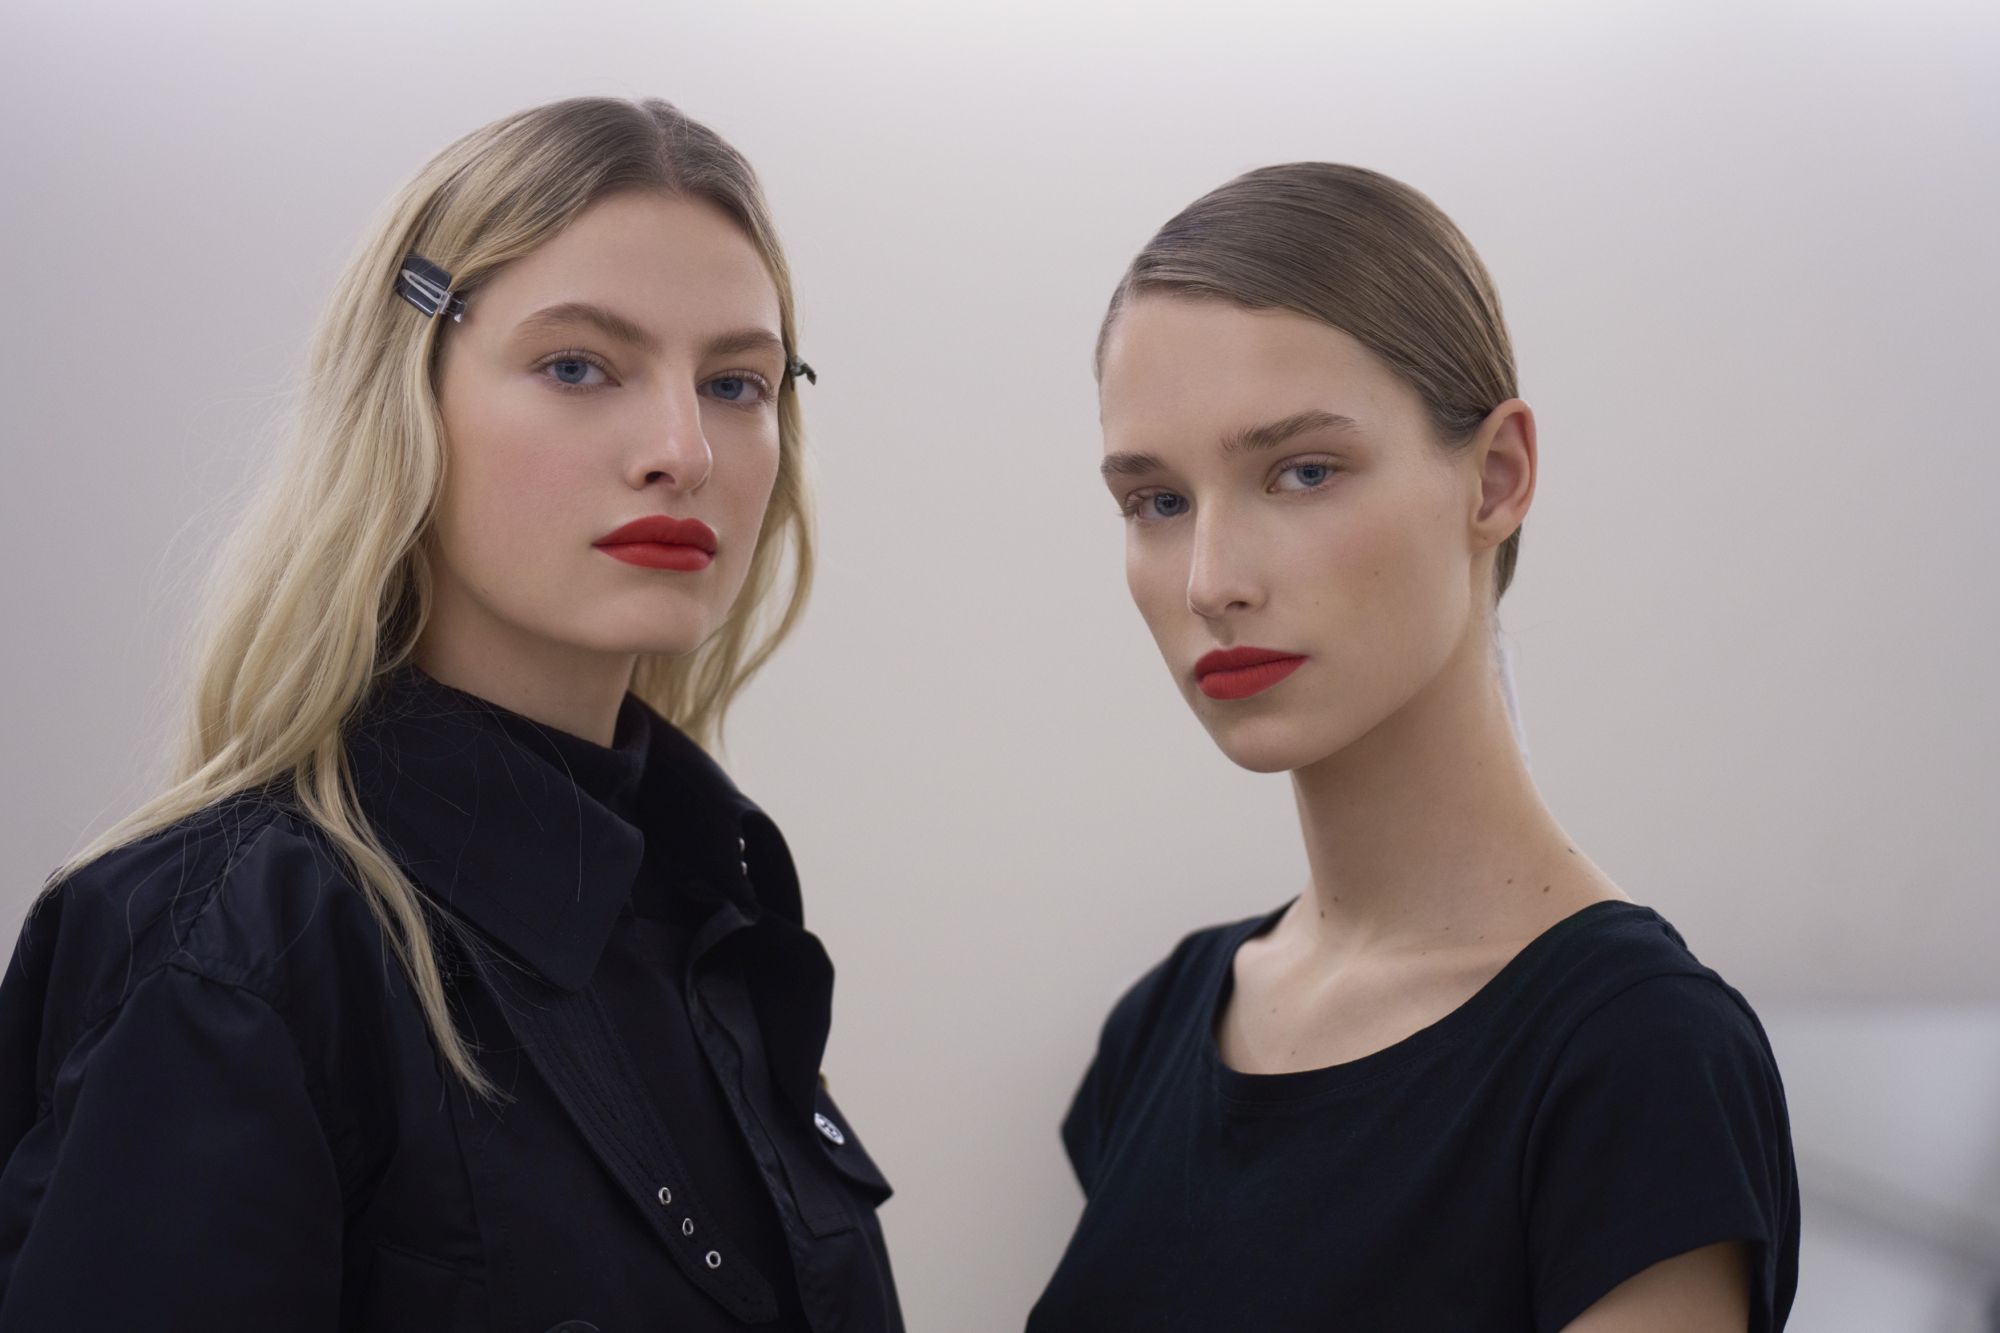 Chanel Makeup Spring 2023 Collection Red